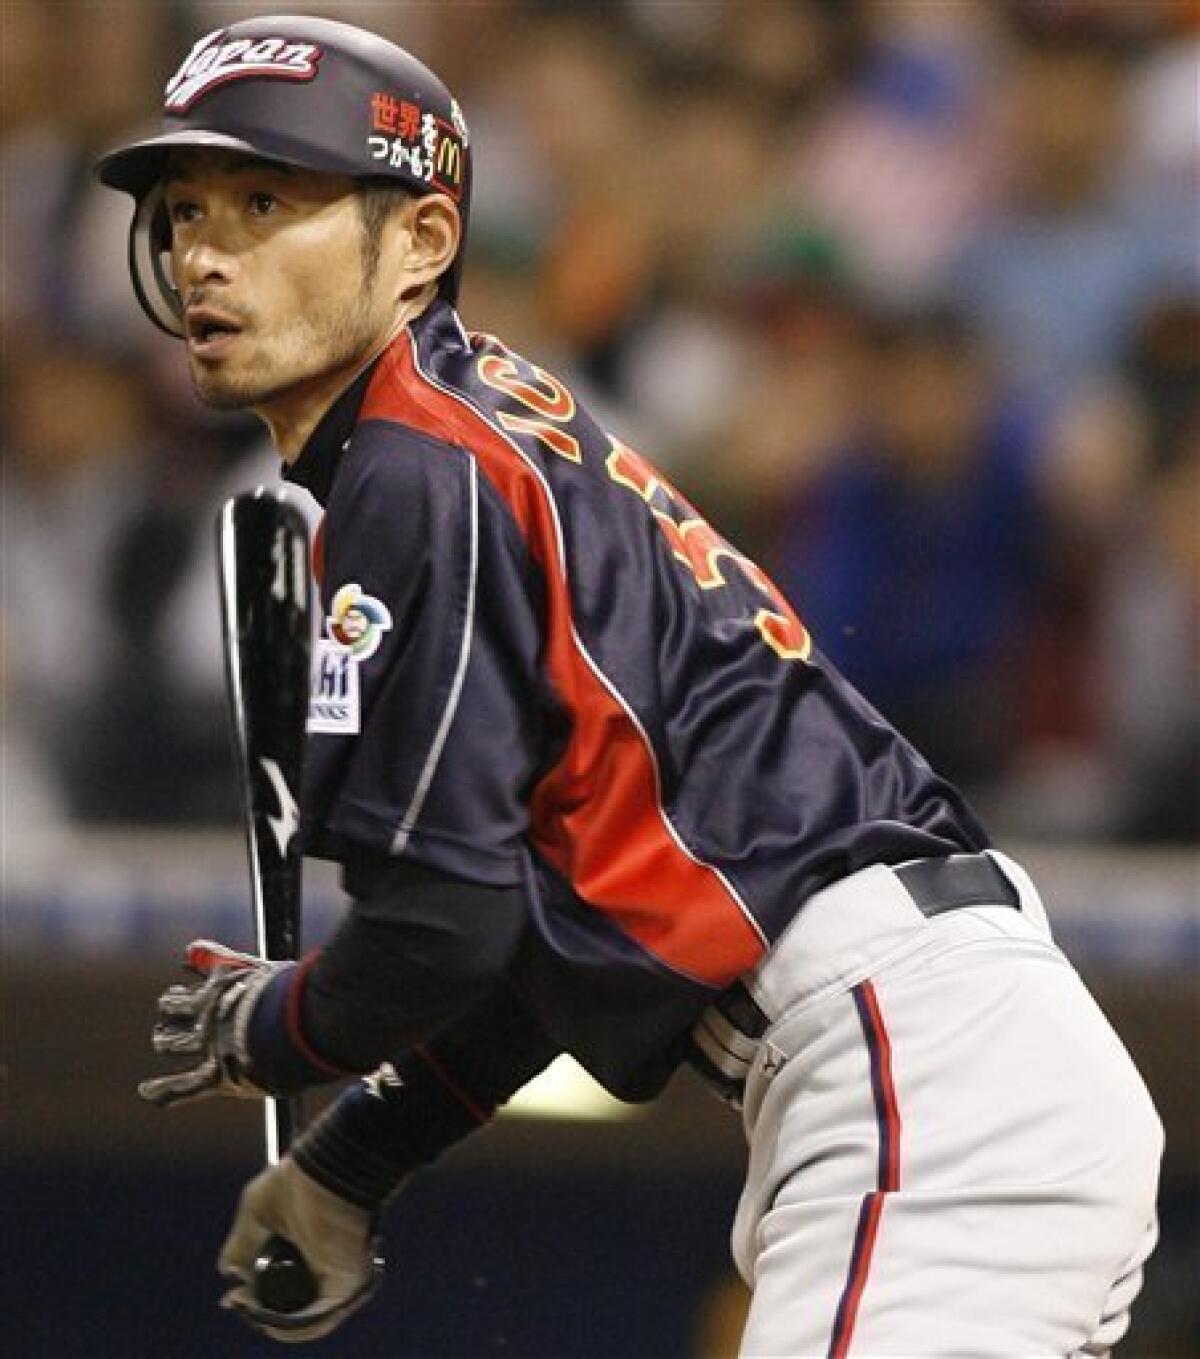 Japan defeat South Korea for second win at World Baseball Classic